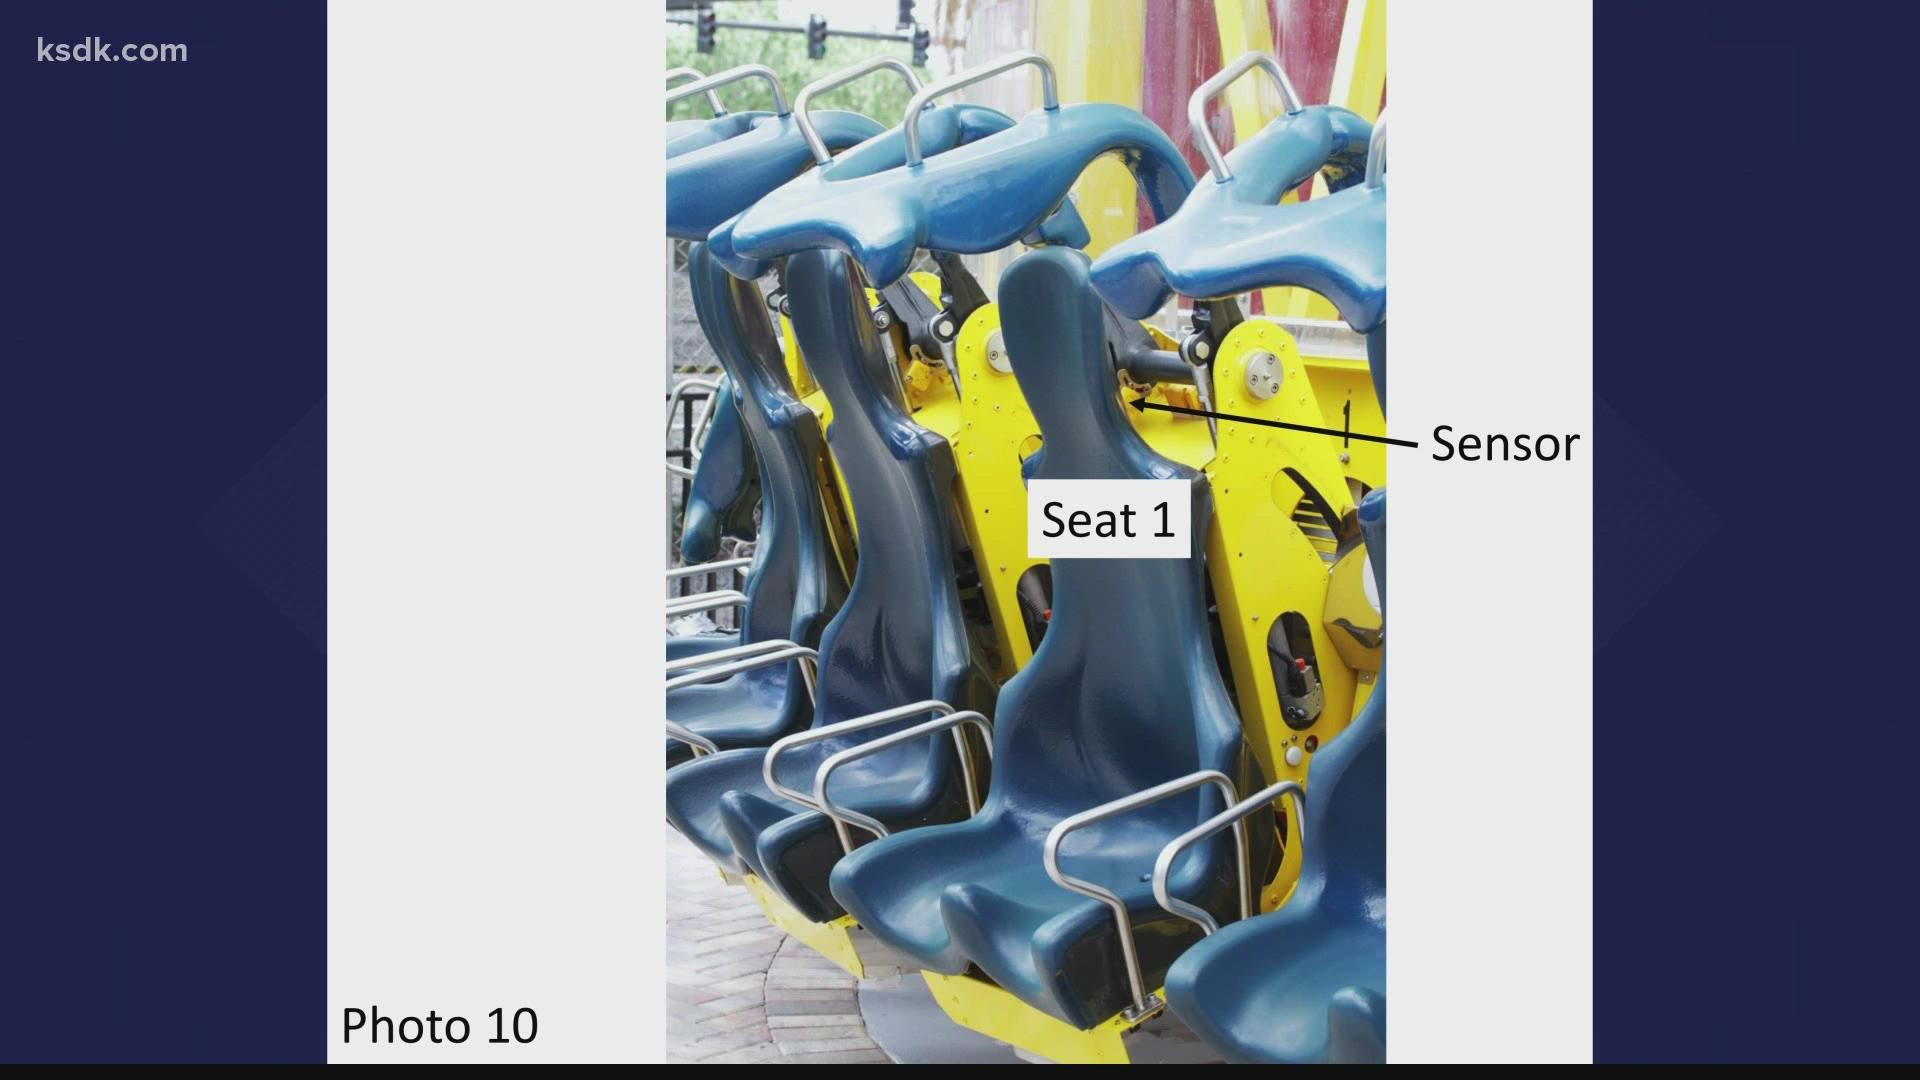 Florida State officials released an engineering report that confirmed a safety sensor was manually adjusted on two seats of Icon Park's Free Fall ride.